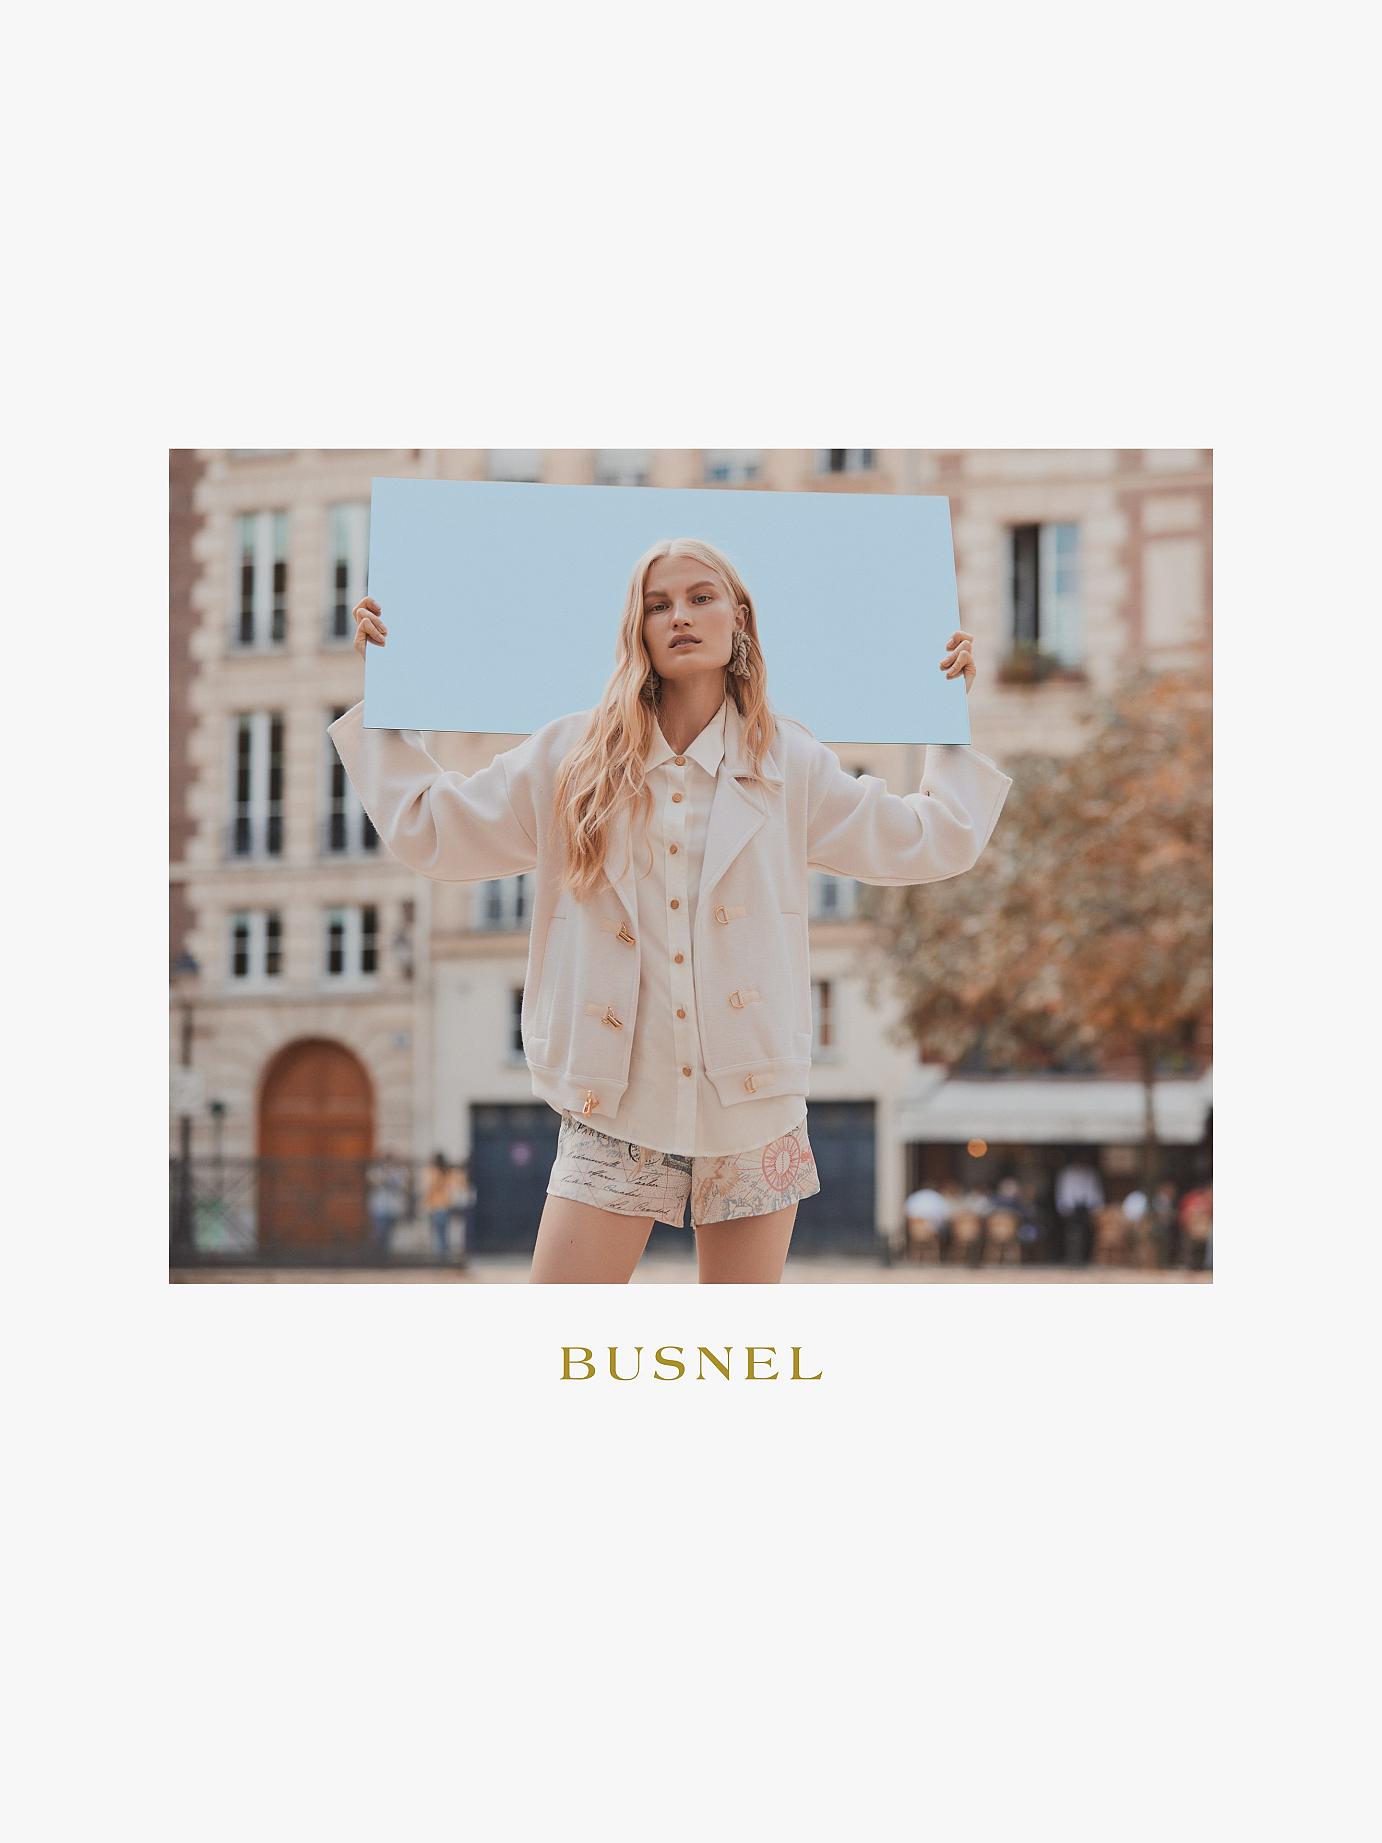 CoqCreative power by ProductionLink s.r.l. Busnel-SS-19 Busnel-SS-19  Busnel-SS-19